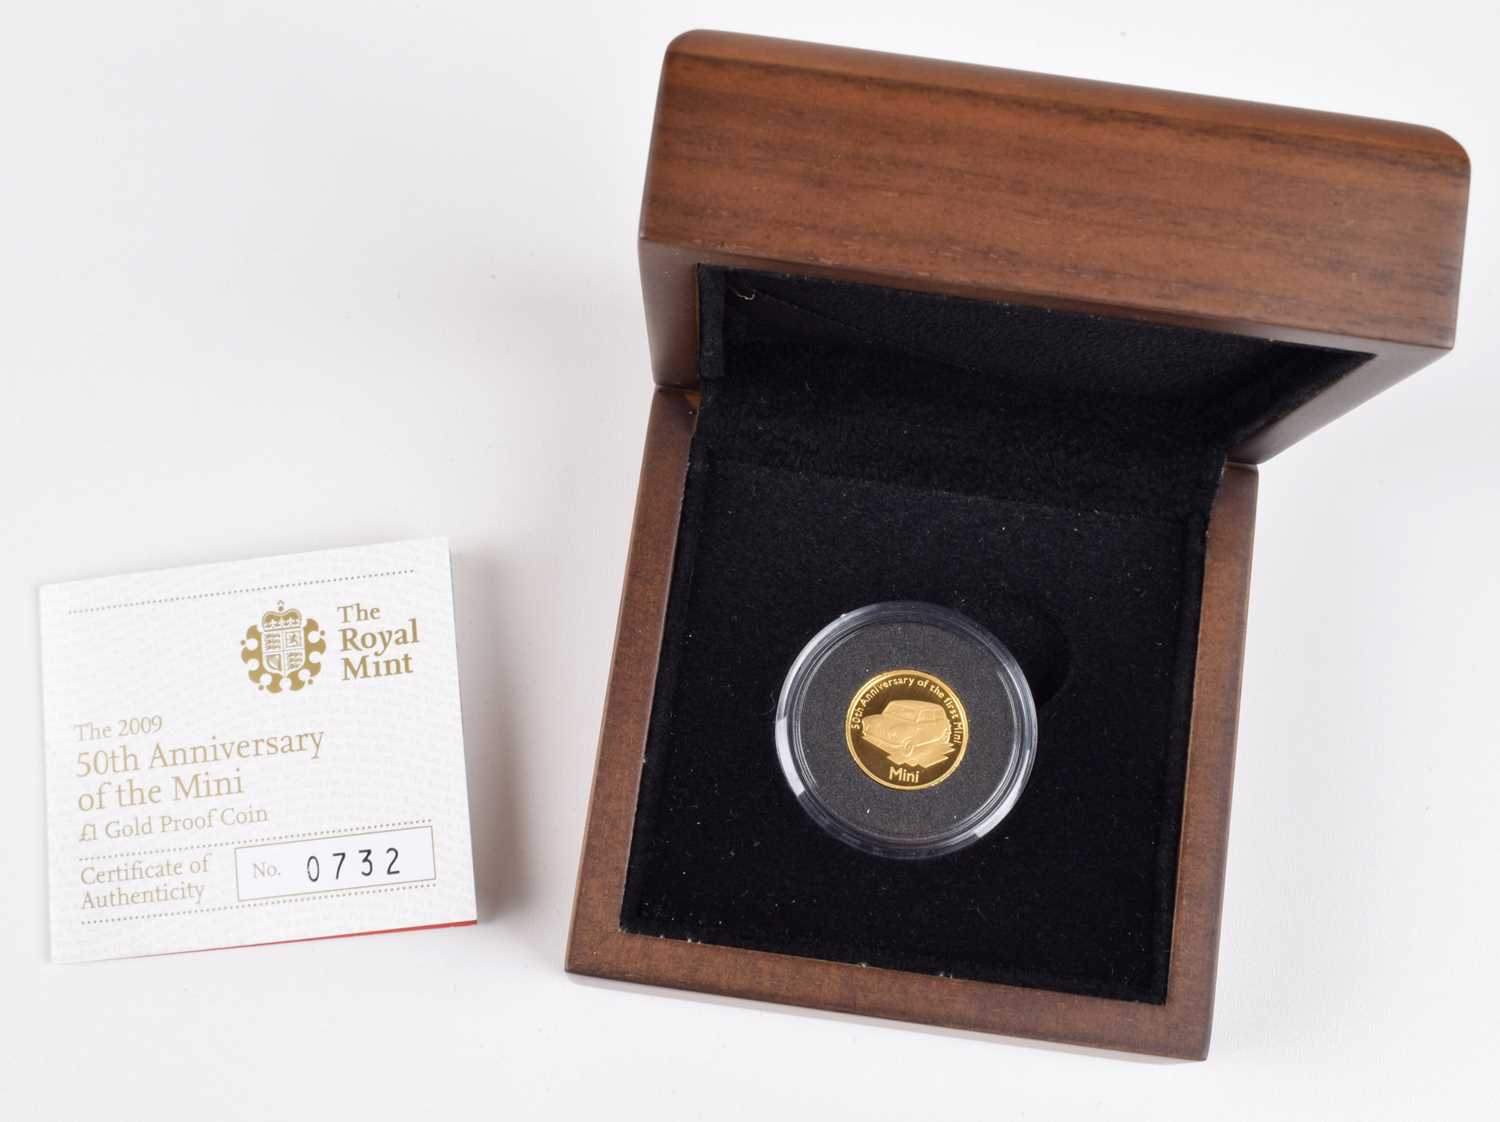 Lot A Royal Mint 2009 Alderney Gold Proof One Pound, 50th Anniversary of the Mini.